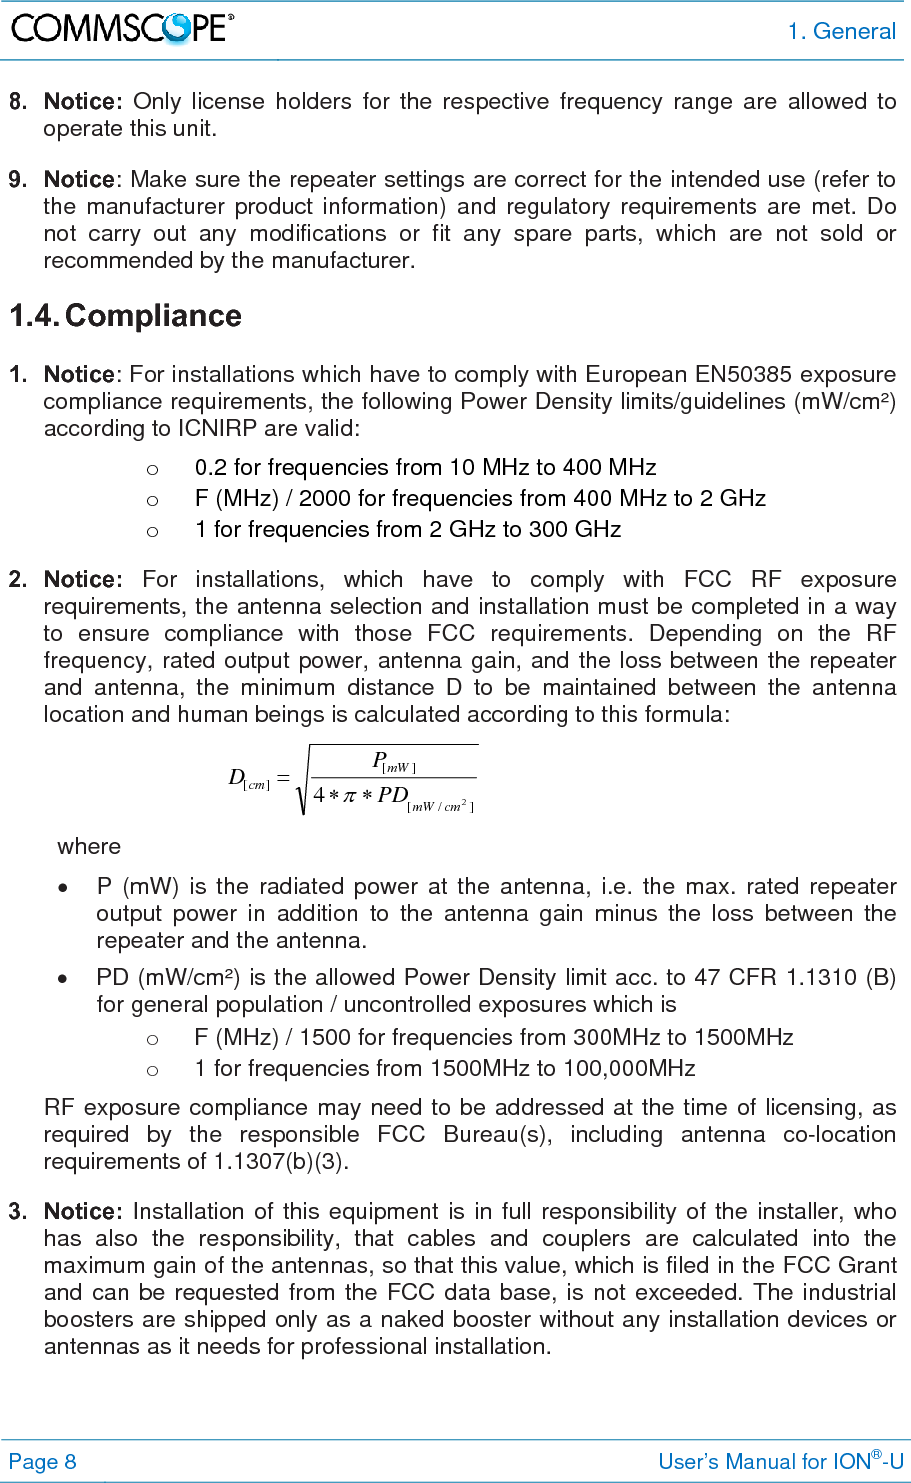  1. General Page 8     User’s Manual for ION®-U 8. Notice: Only license holders for the respective frequency range are allowed to operate this unit. 9. Notice: Make sure the repeater settings are correct for the intended use (refer to the manufacturer product information) and regulatory requirements are met. Do not carry out any modifications or fit any spare parts, which are not sold or recommended by the manufacturer. 1.4. Compliance  1. Notice: For installations which have to comply with European EN50385 exposure compliance requirements, the following Power Density limits/guidelines (mW/cm²) according to ICNIRP are valid: o  0.2 for frequencies from 10 MHz to 400 MHz o  F (MHz) / 2000 for frequencies from 400 MHz to 2 GHz o  1 for frequencies from 2 GHz to 300 GHz 2. Notice: For installations, which have to comply with FCC RF exposure requirements, the antenna selection and installation must be completed in a way to ensure compliance with those FCC requirements. Depending on the RF frequency, rated output power, antenna gain, and the loss between the repeater and antenna, the minimum distance D to be maintained between the antenna location and human beings is calculated according to this formula:  ]/[][][24cmmWmWcmPDPD  where   P (mW) is the radiated power at the antenna, i.e. the max. rated repeater output power in addition to the antenna gain minus the loss between the repeater and the antenna.   PD (mW/cm²) is the allowed Power Density limit acc. to 47 CFR 1.1310 (B) for general population / uncontrolled exposures which is o  F (MHz) / 1500 for frequencies from 300MHz to 1500MHz o  1 for frequencies from 1500MHz to 100,000MHz RF exposure compliance may need to be addressed at the time of licensing, as required by the responsible FCC Bureau(s), including antenna co-location requirements of 1.1307(b)(3). 3. Notice: Installation of this equipment is in full responsibility of the installer, who has also the responsibility, that cables and couplers are calculated into the maximum gain of the antennas, so that this value, which is filed in the FCC Grant and can be requested from the FCC data base, is not exceeded. The industrial boosters are shipped only as a naked booster without any installation devices or antennas as it needs for professional installation.  